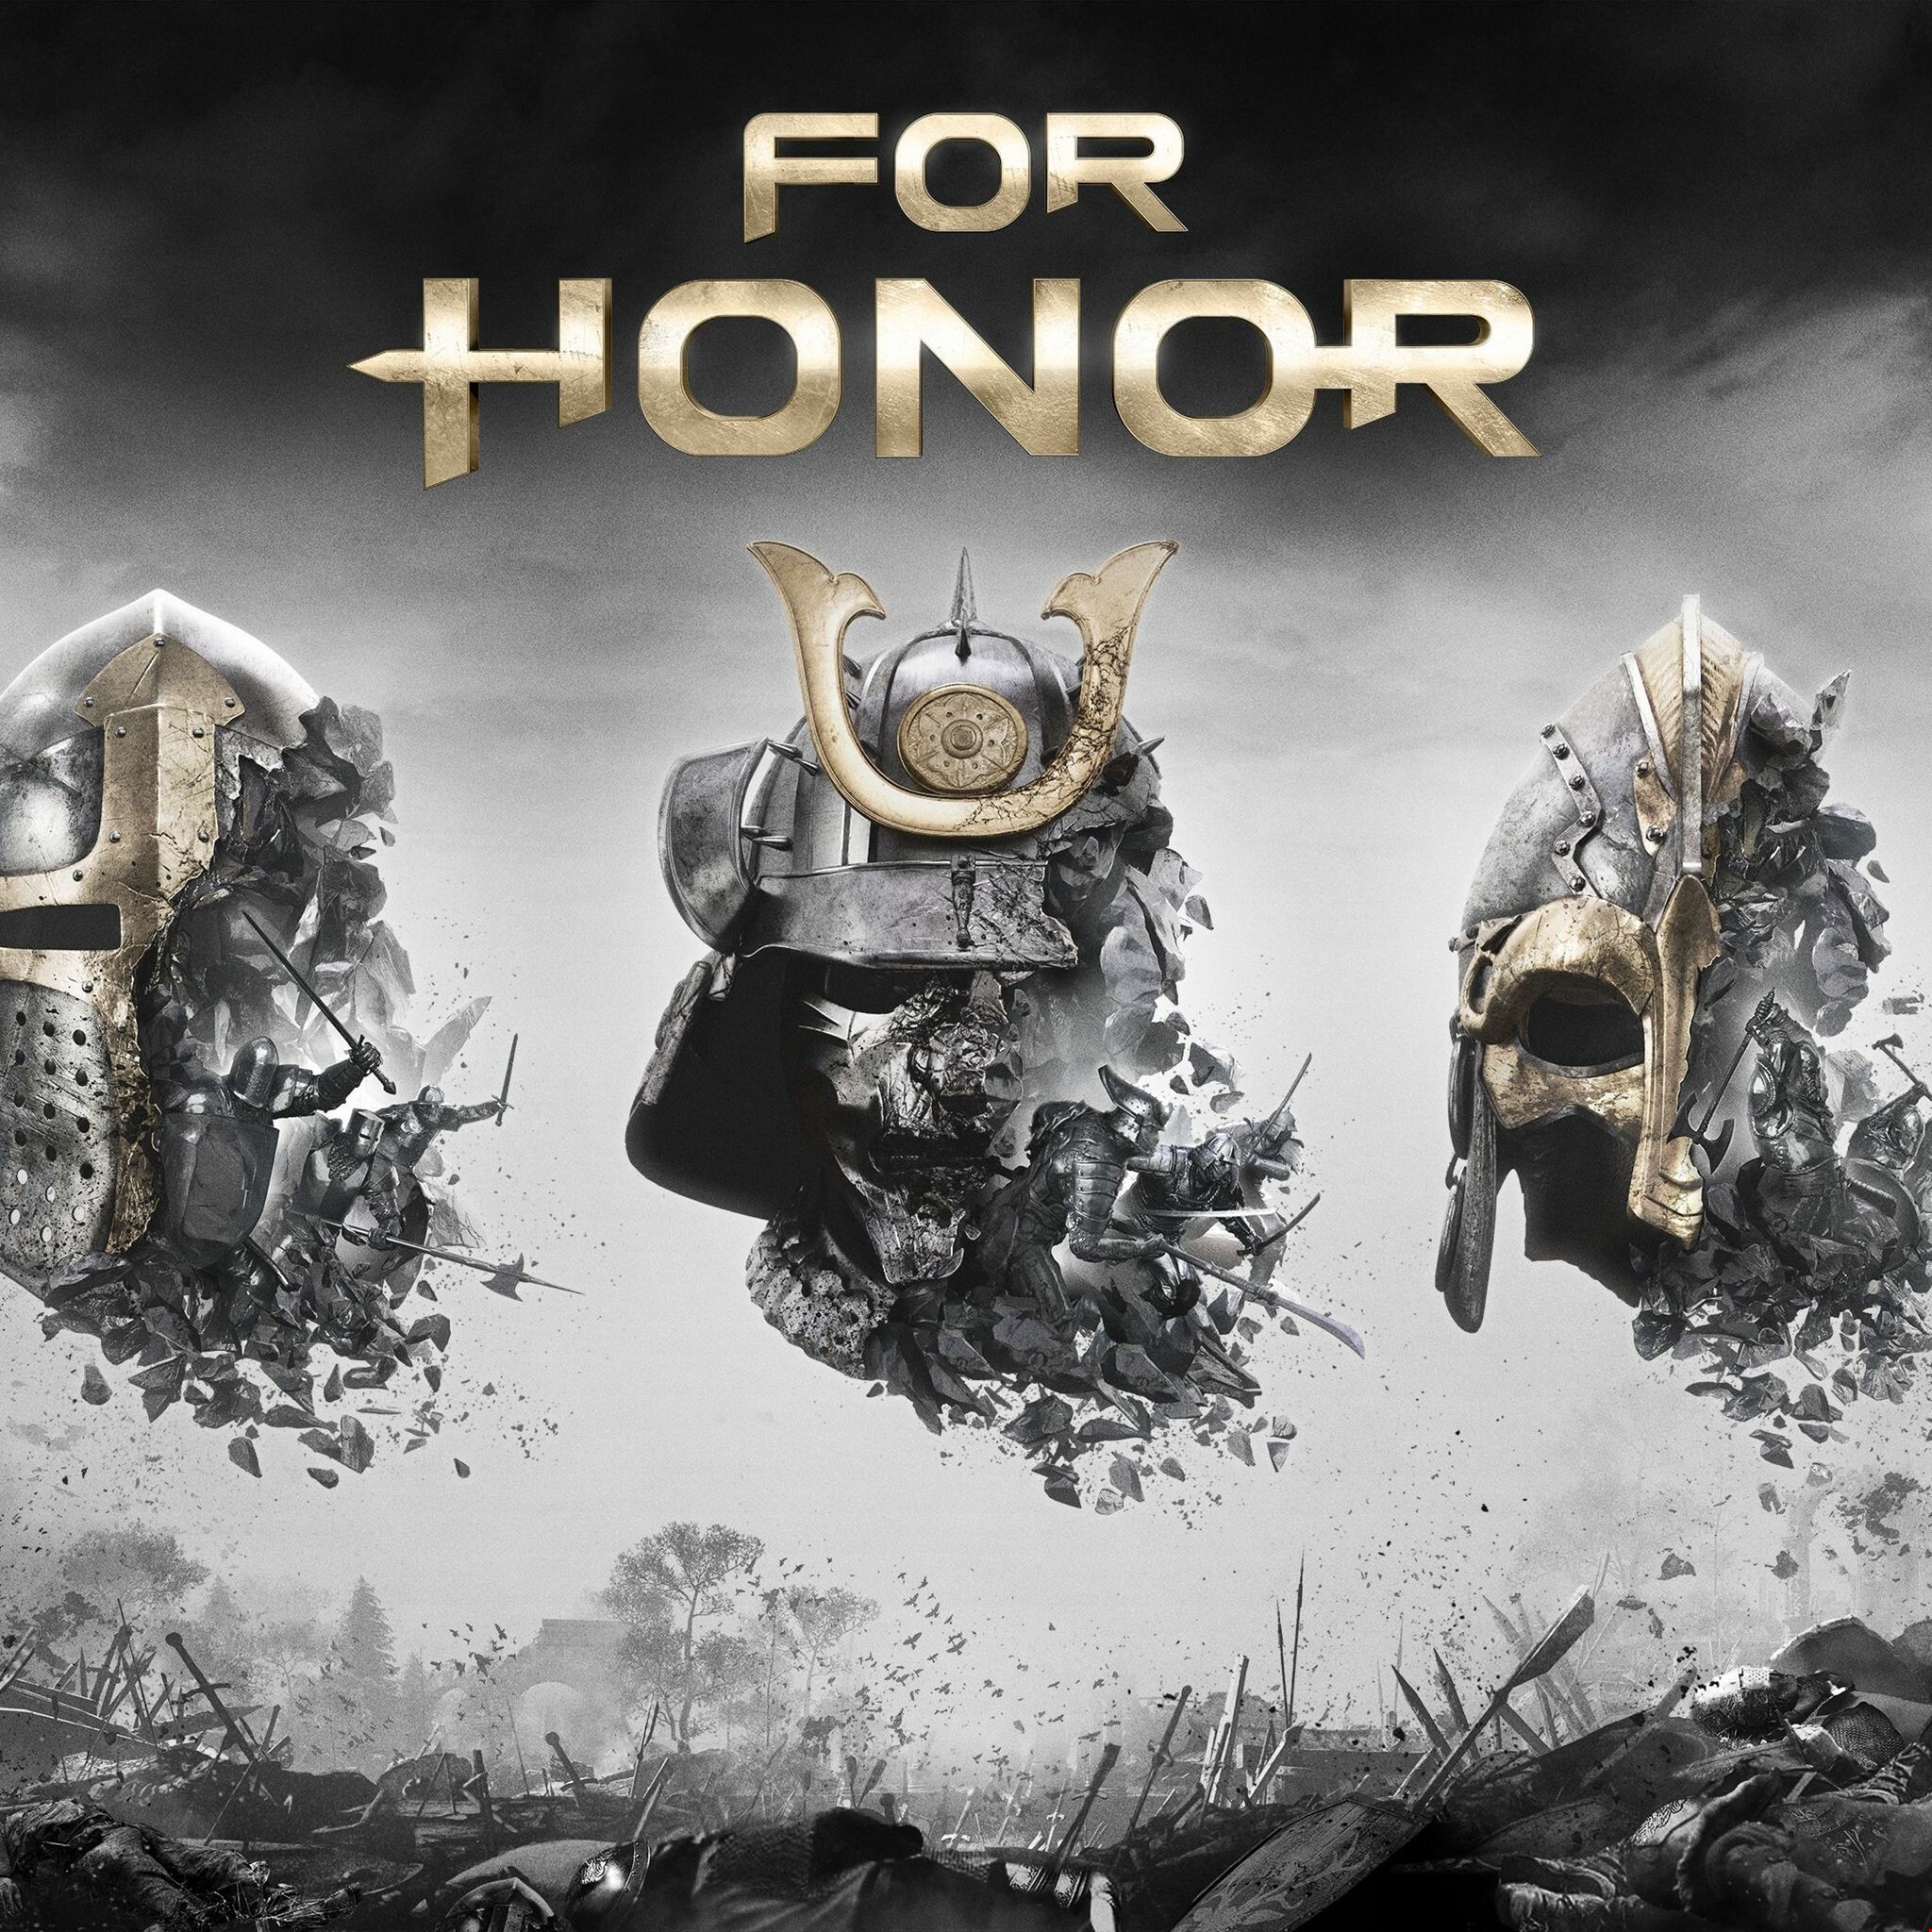 52+ For Honor Game Wallpapers: HD, 4K, 5K for PC and Mobile | Download free  images for iPhone, Android